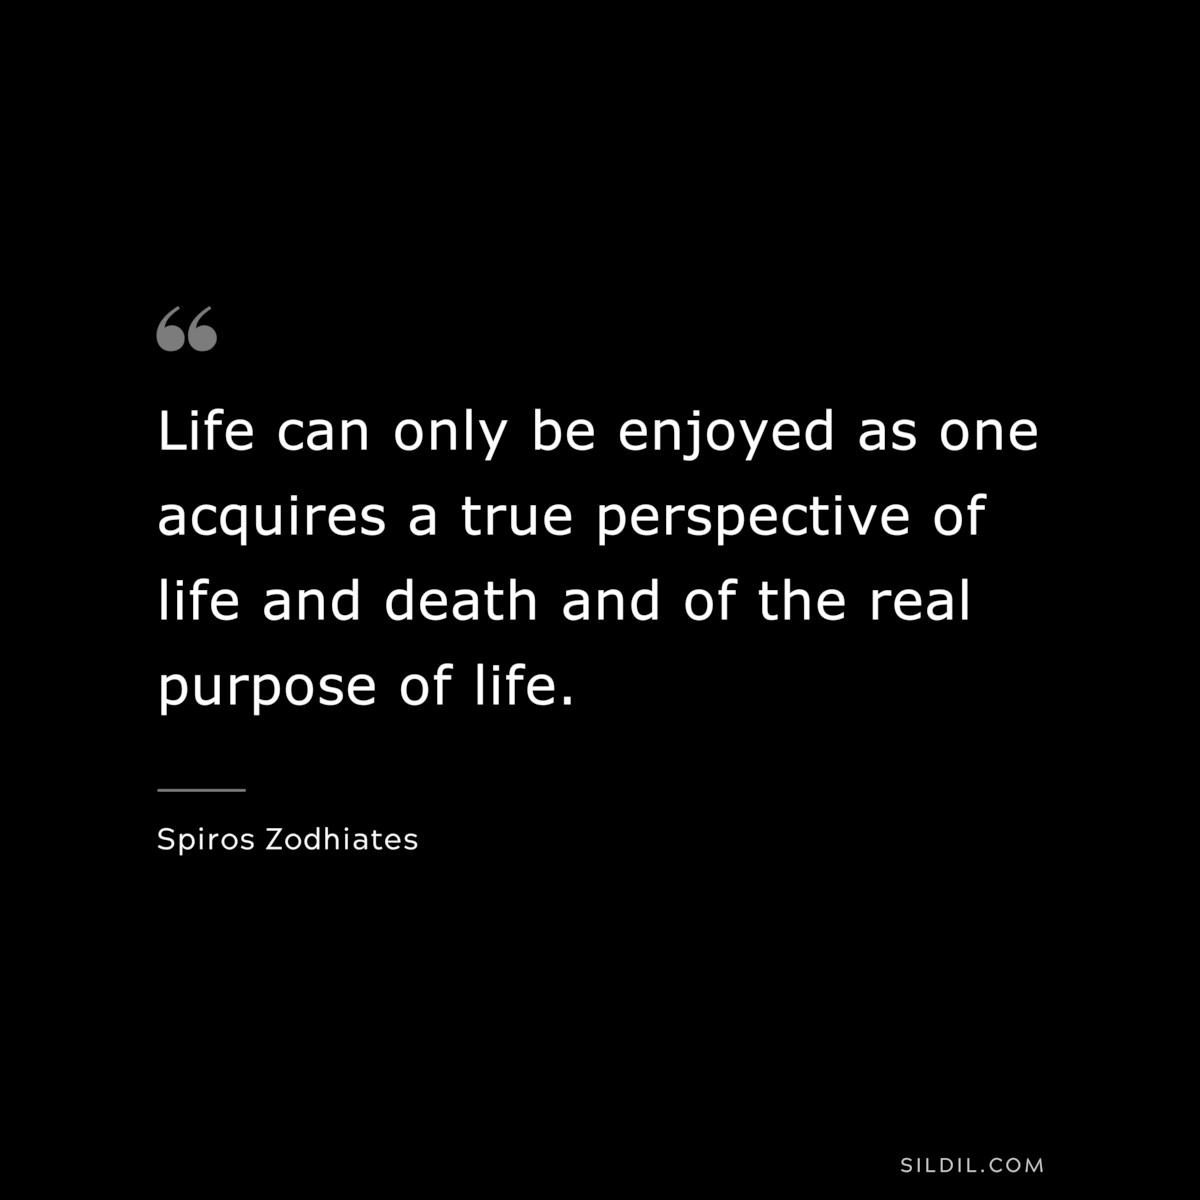 Life can only be enjoyed as one acquires a true perspective of life and death and of the real purpose of life. ― Spiros Zodhiates